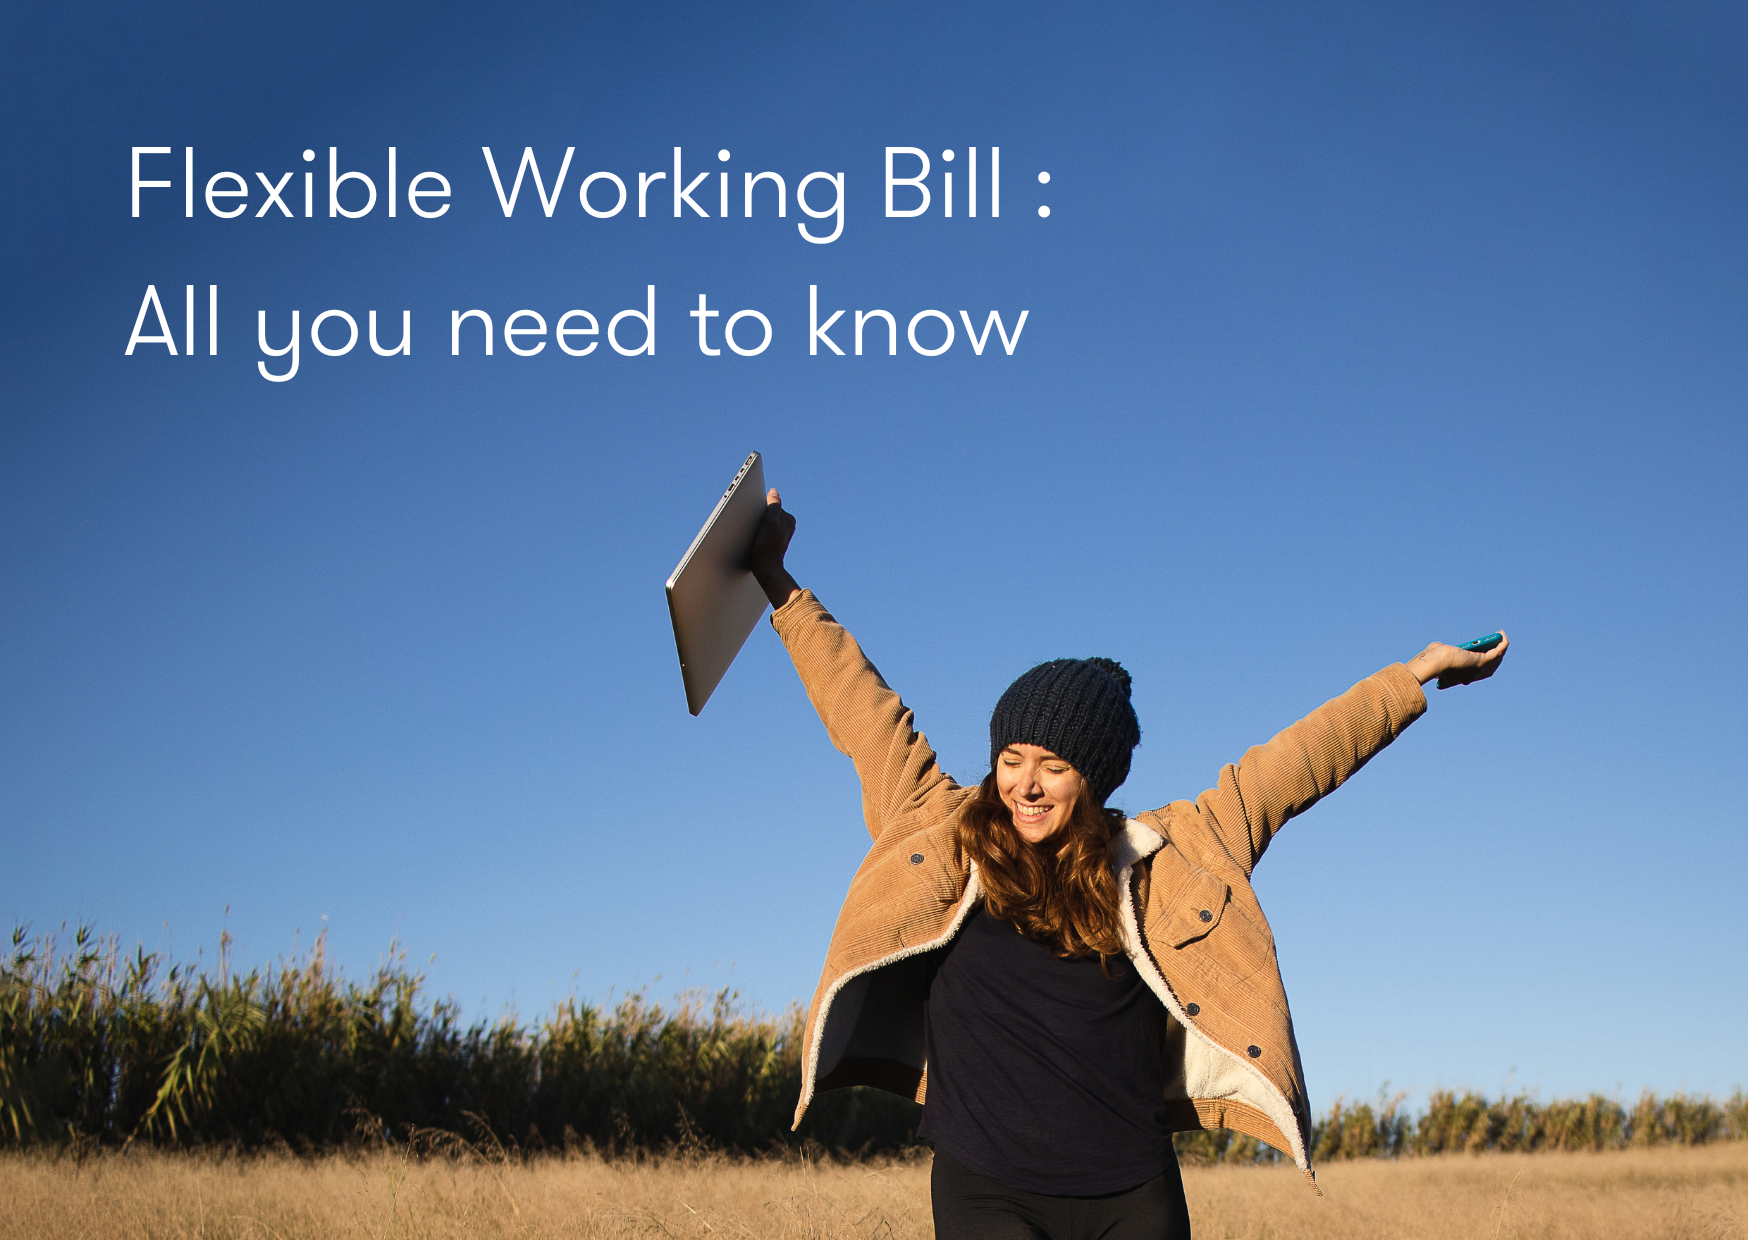 A New Era of Flexibility: All you need to know about the Flexible Working Bill